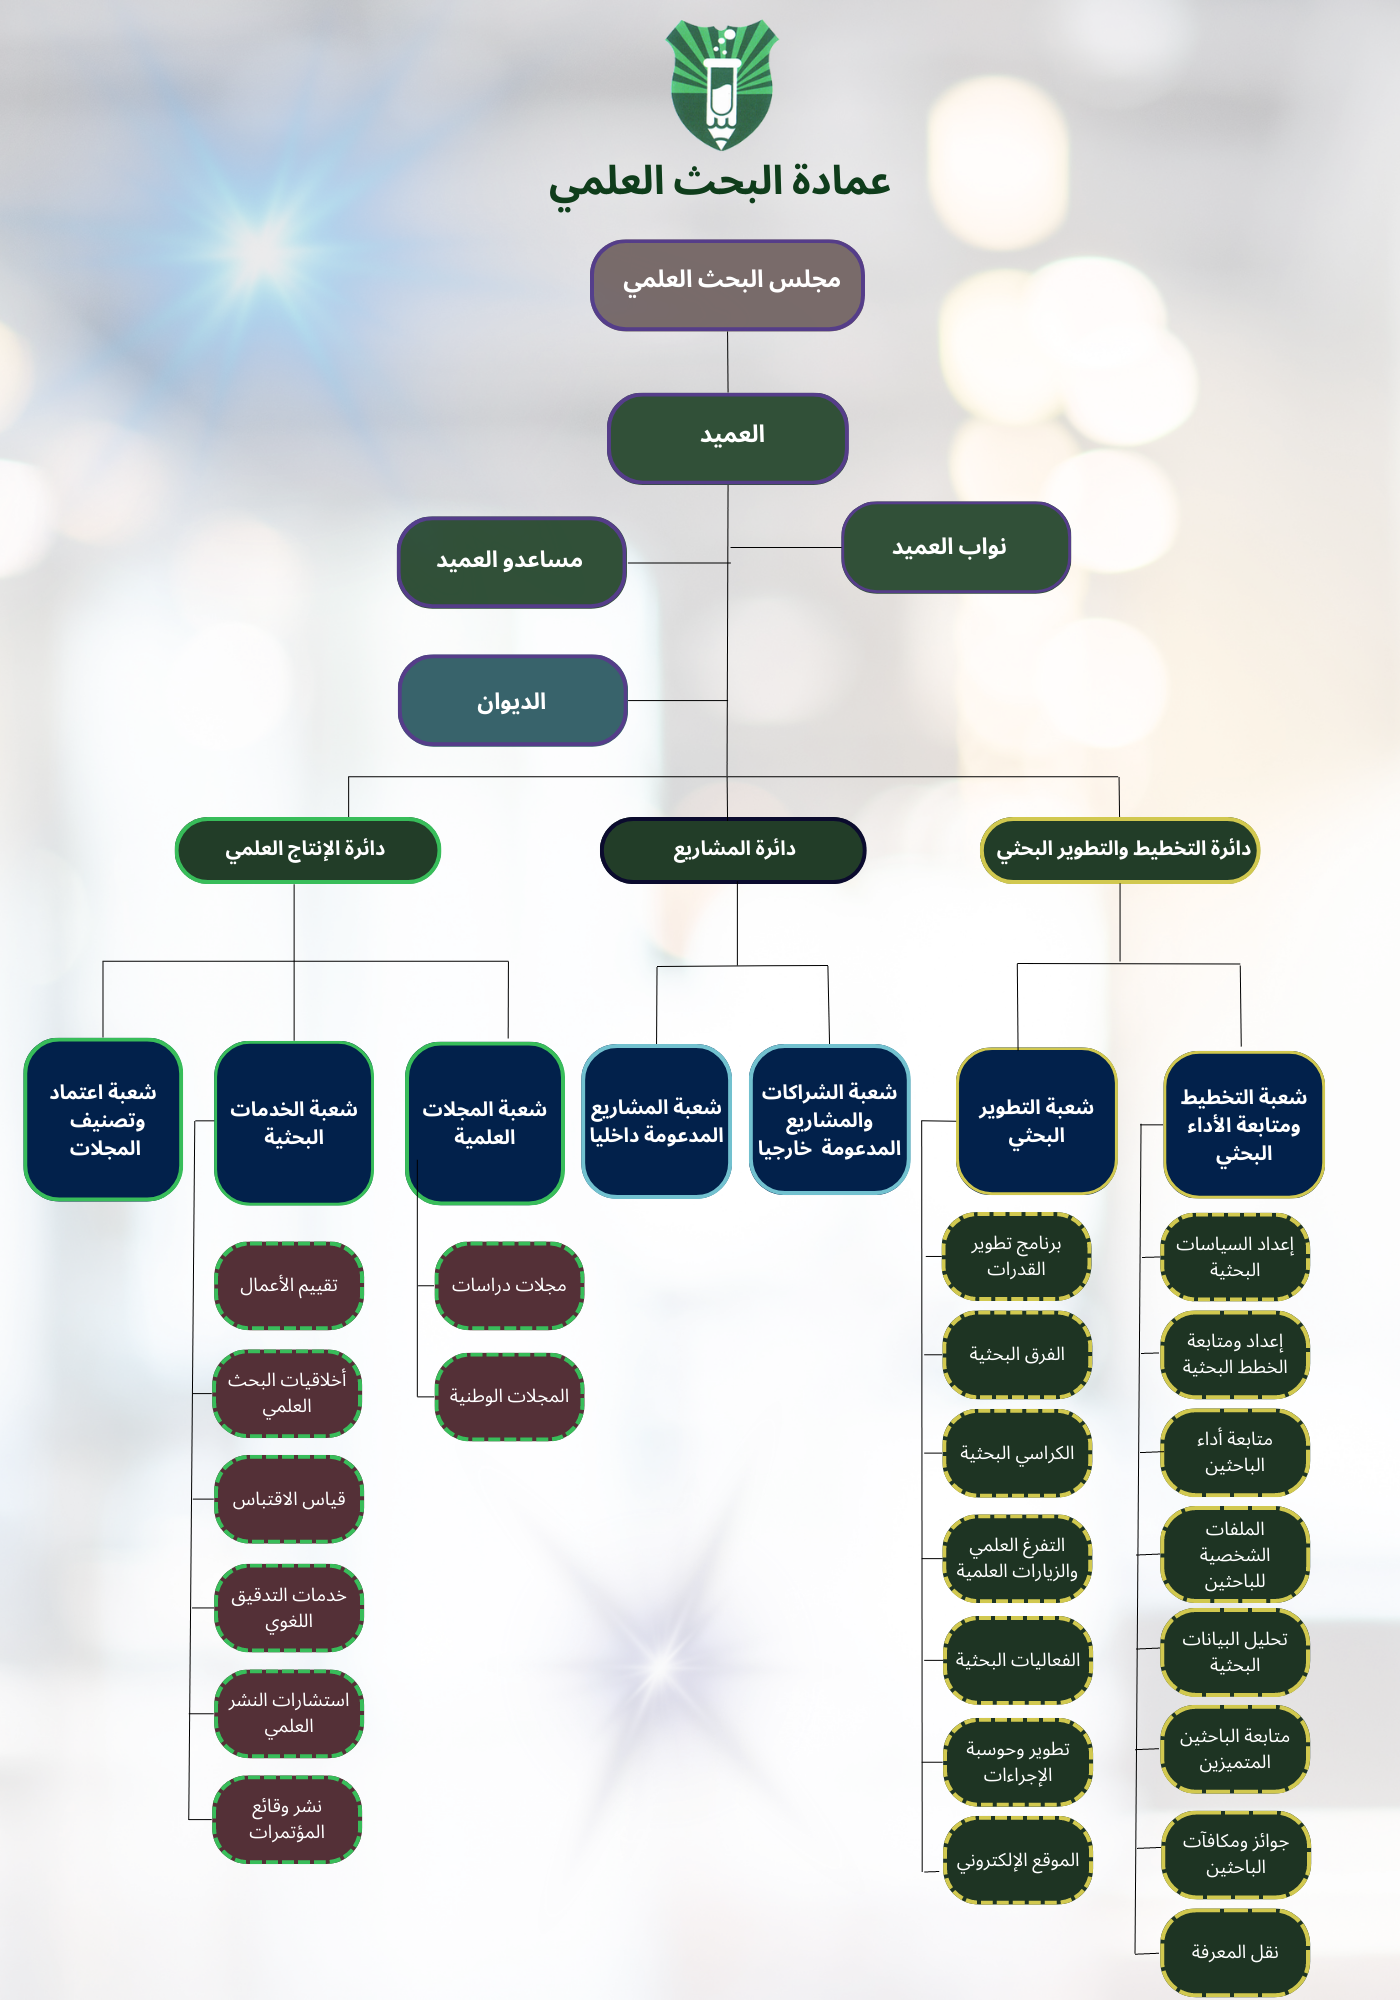 arabic picture - structure.png